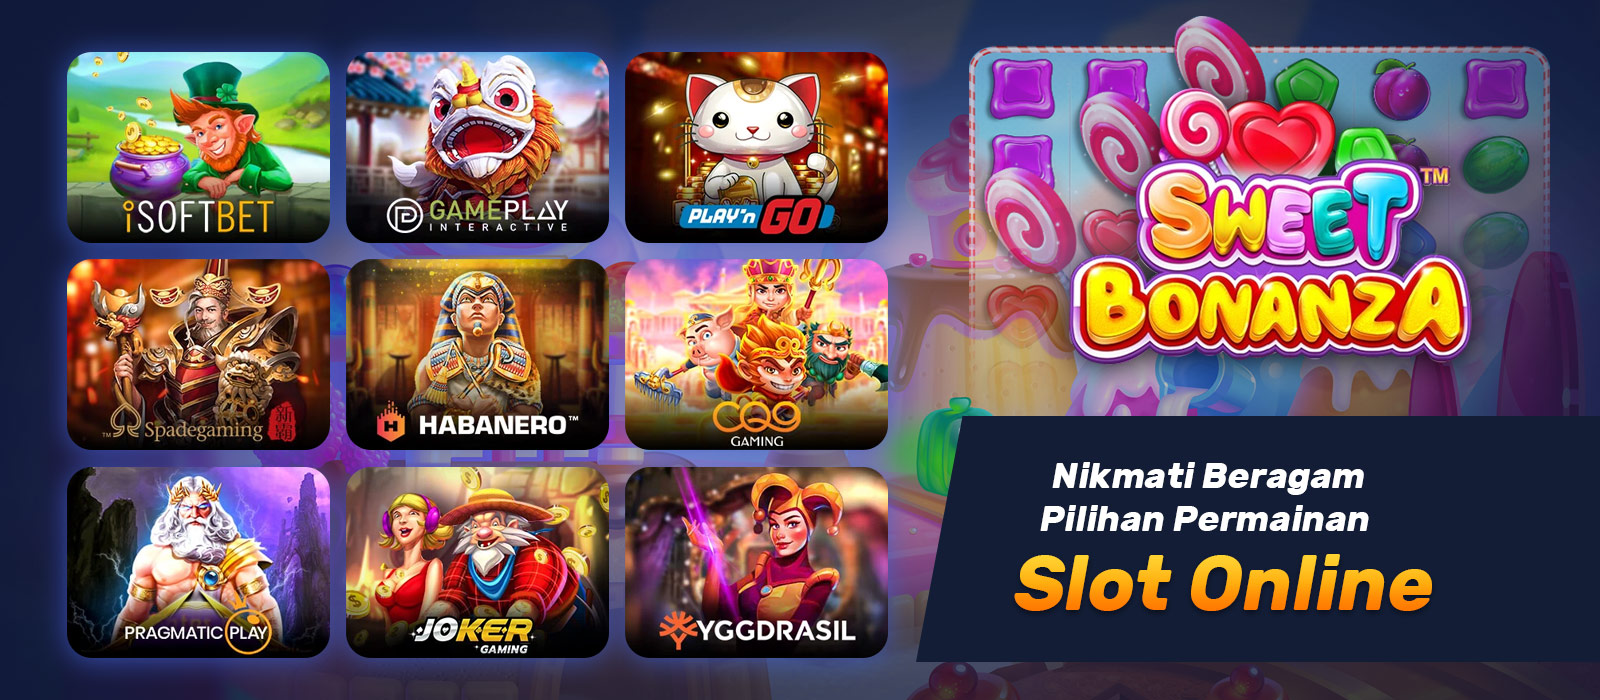 Spin to Win: Ladang78’s Top-Rated Online Slot Experience